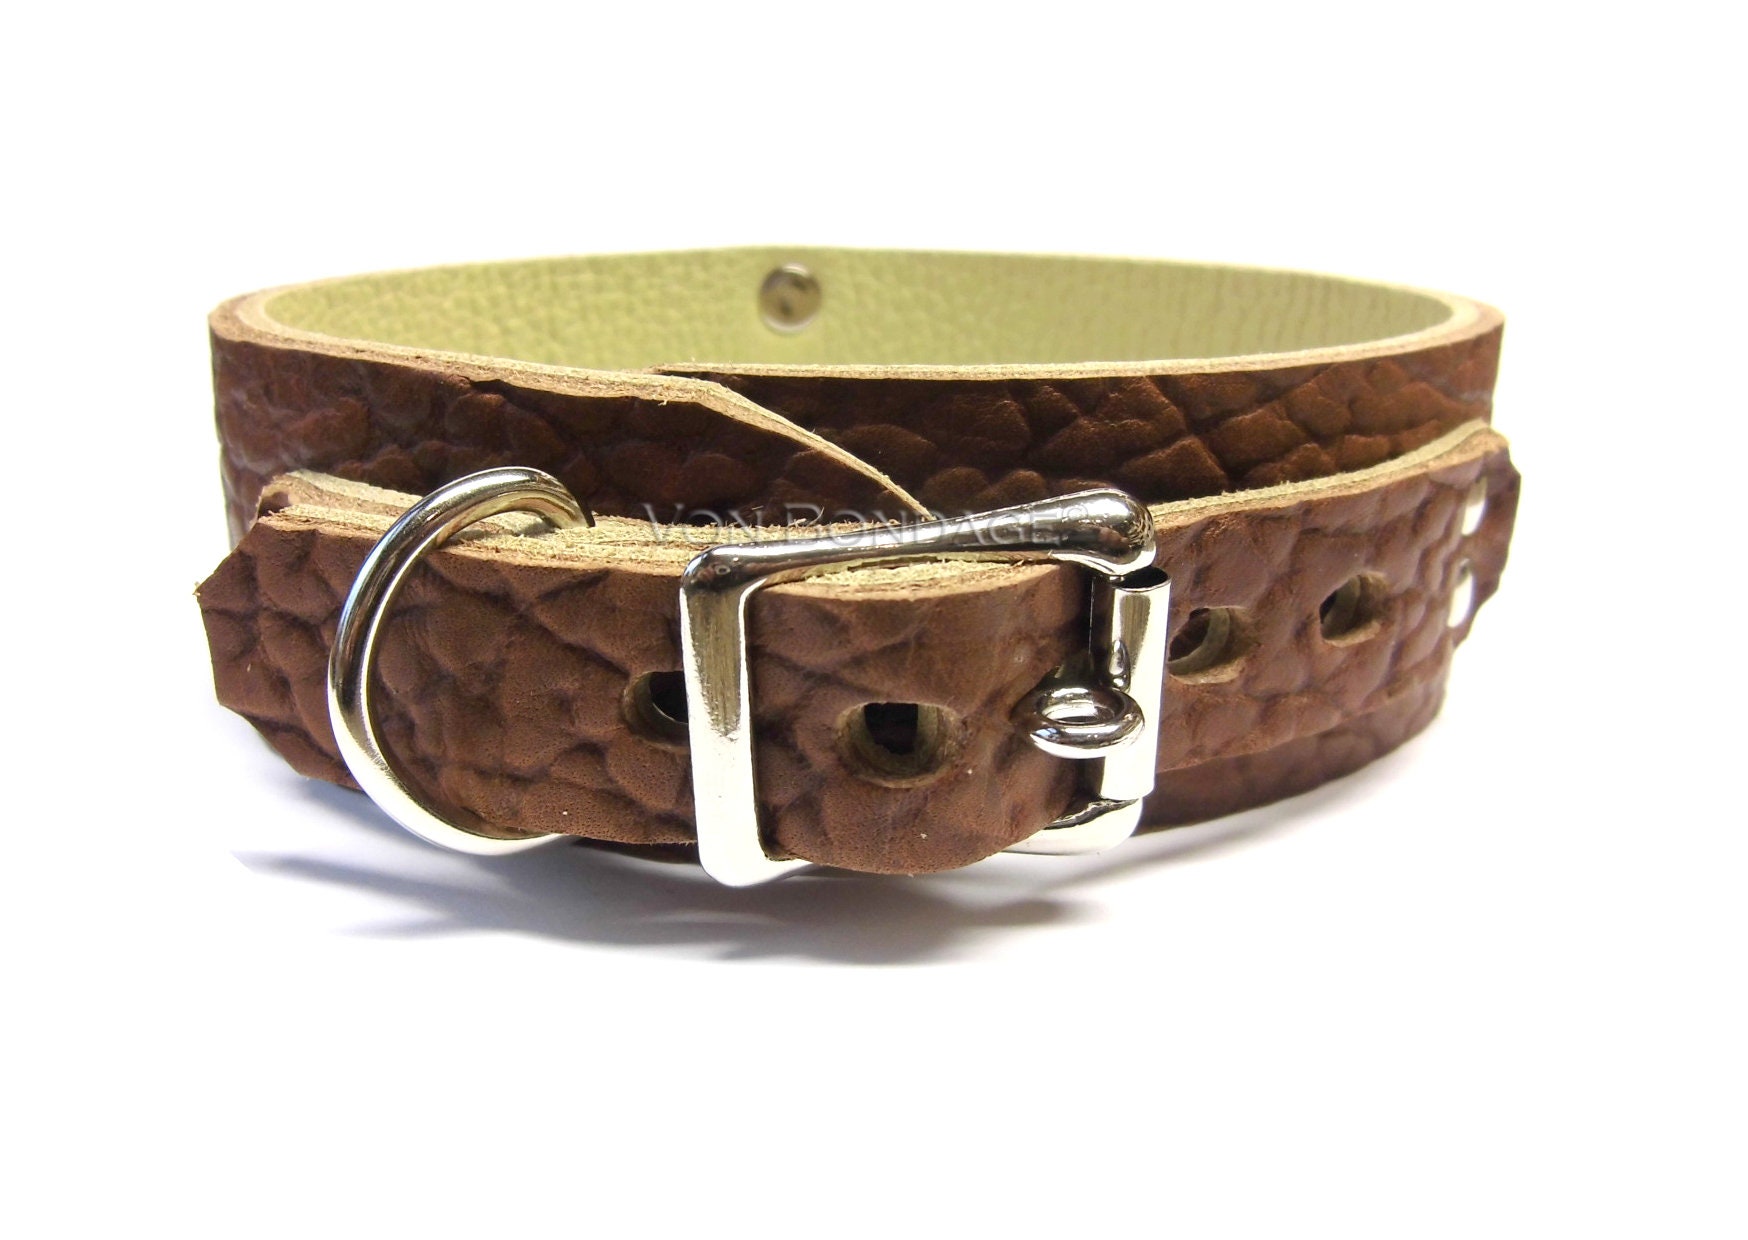 1.5" Brown Bullhide Leather BDSM Collar for slave/sub with Lg O-ring Lockable Buckle Option Custom Sizing, bondage collar for submissive/little photo